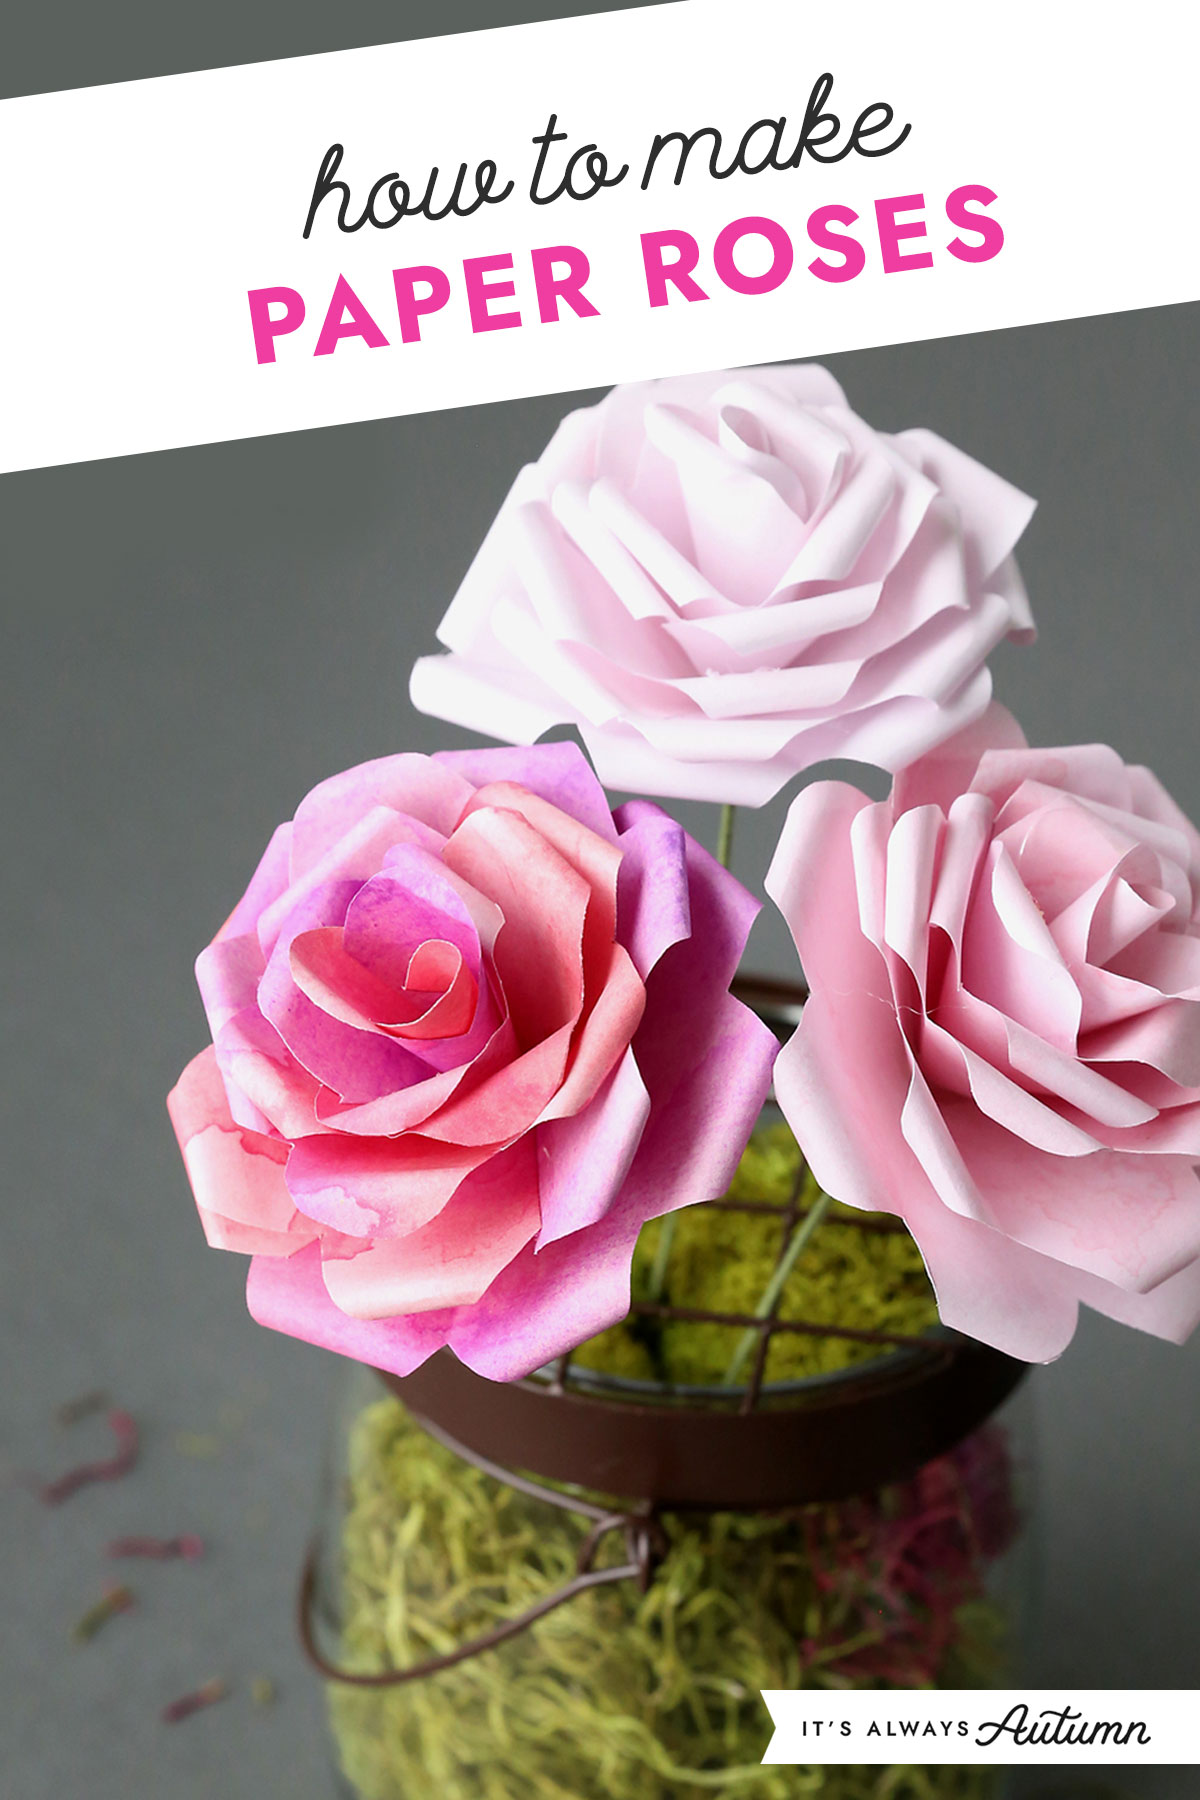 How To Make A Heart Shaped Paper Gift Box With Red Roses - gift ideas 